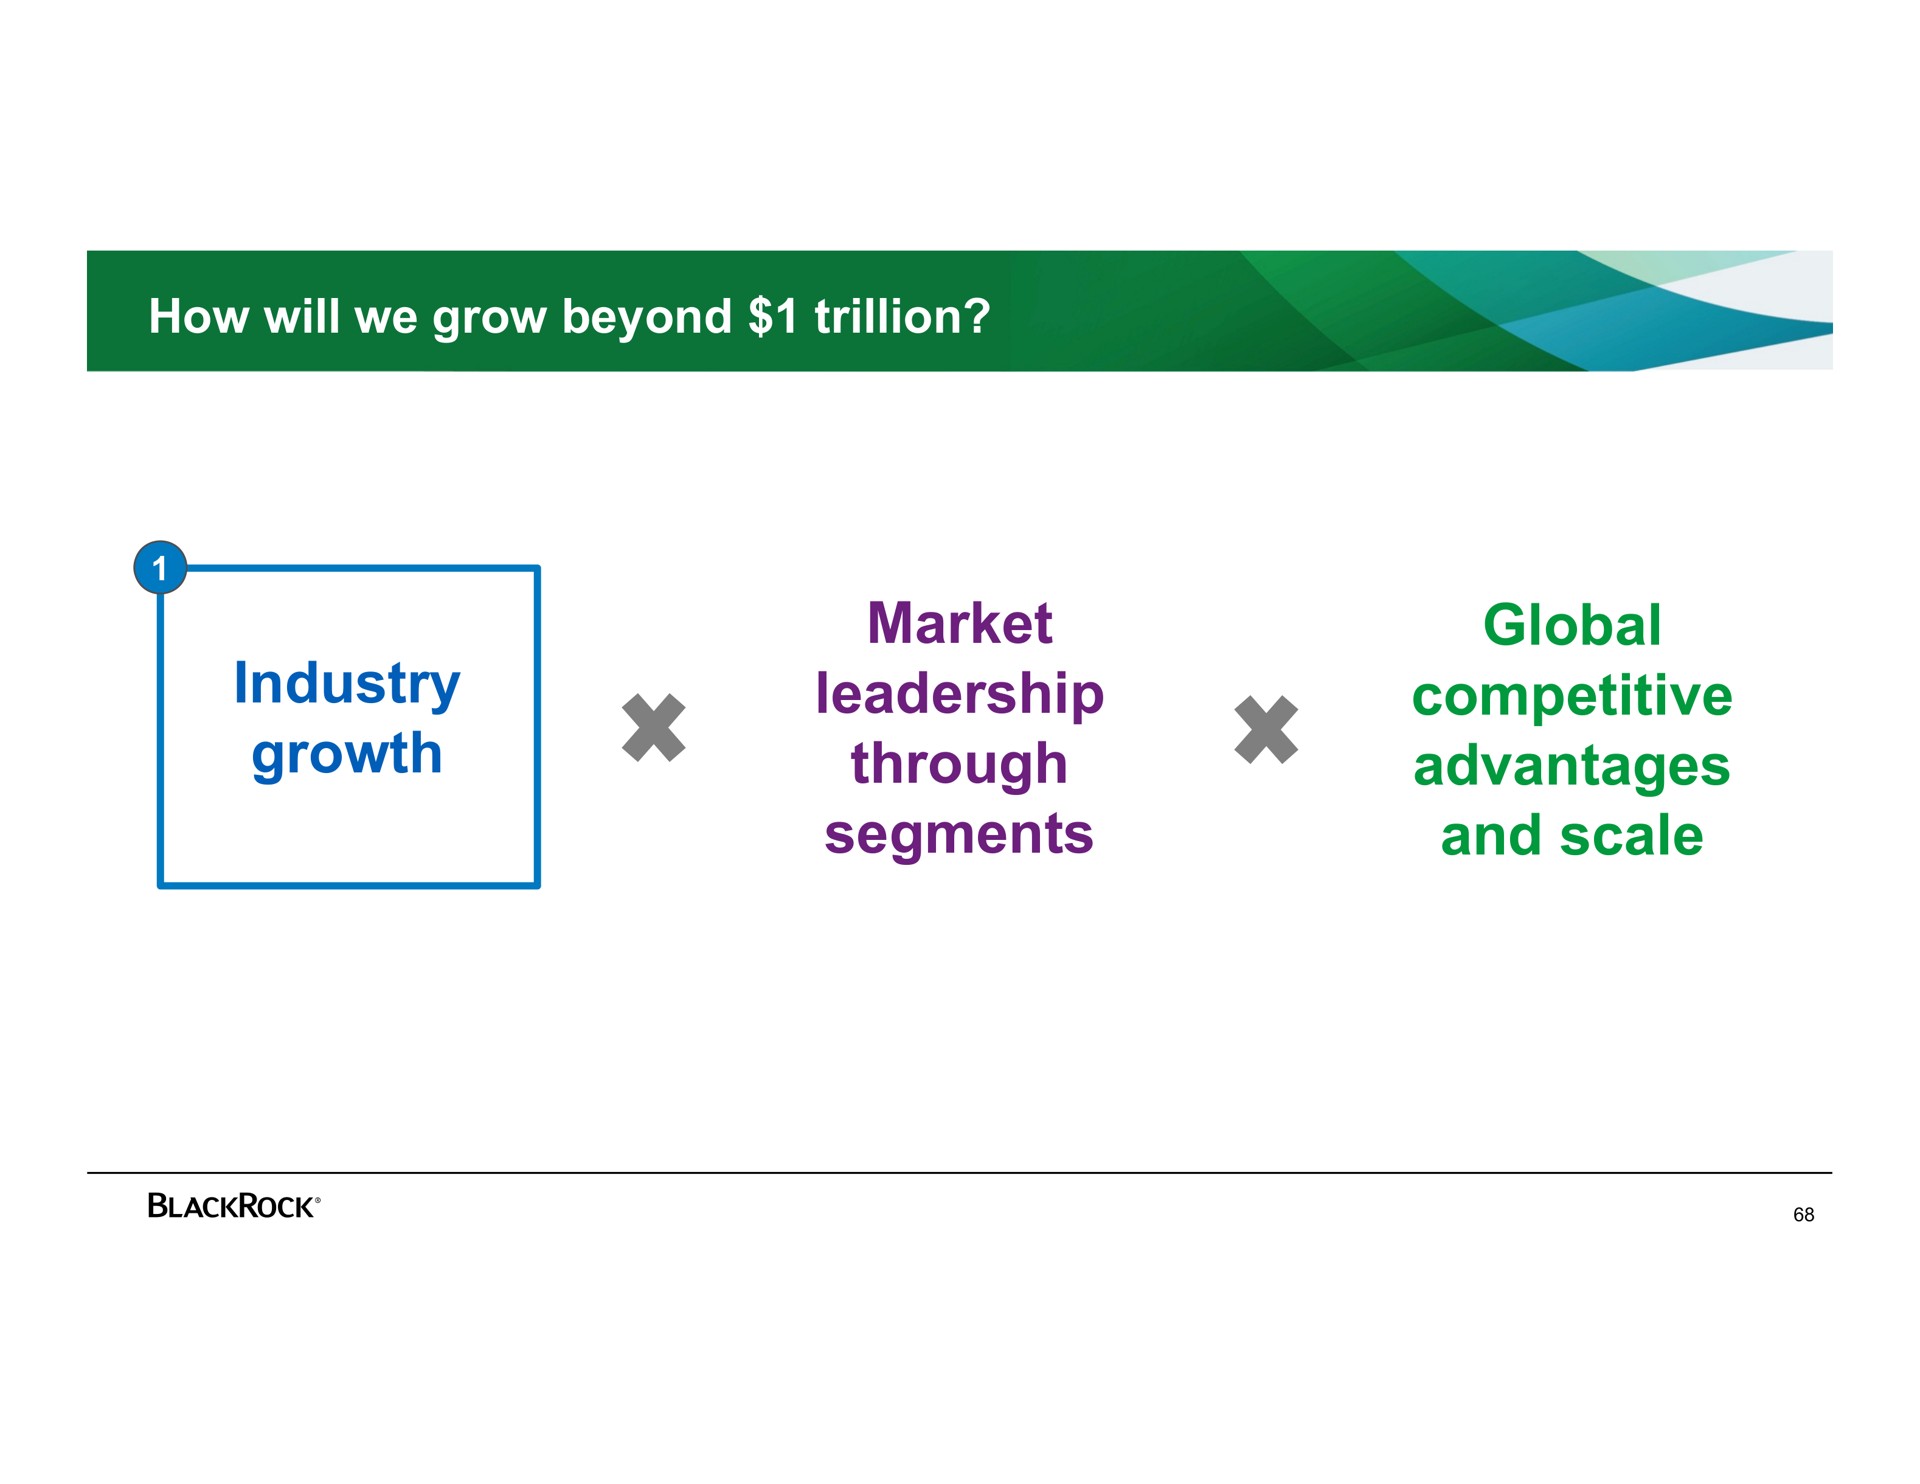 how will we grow beyond trillion industry growth market leadership through segments global competitive advantages and scale | BlackRock